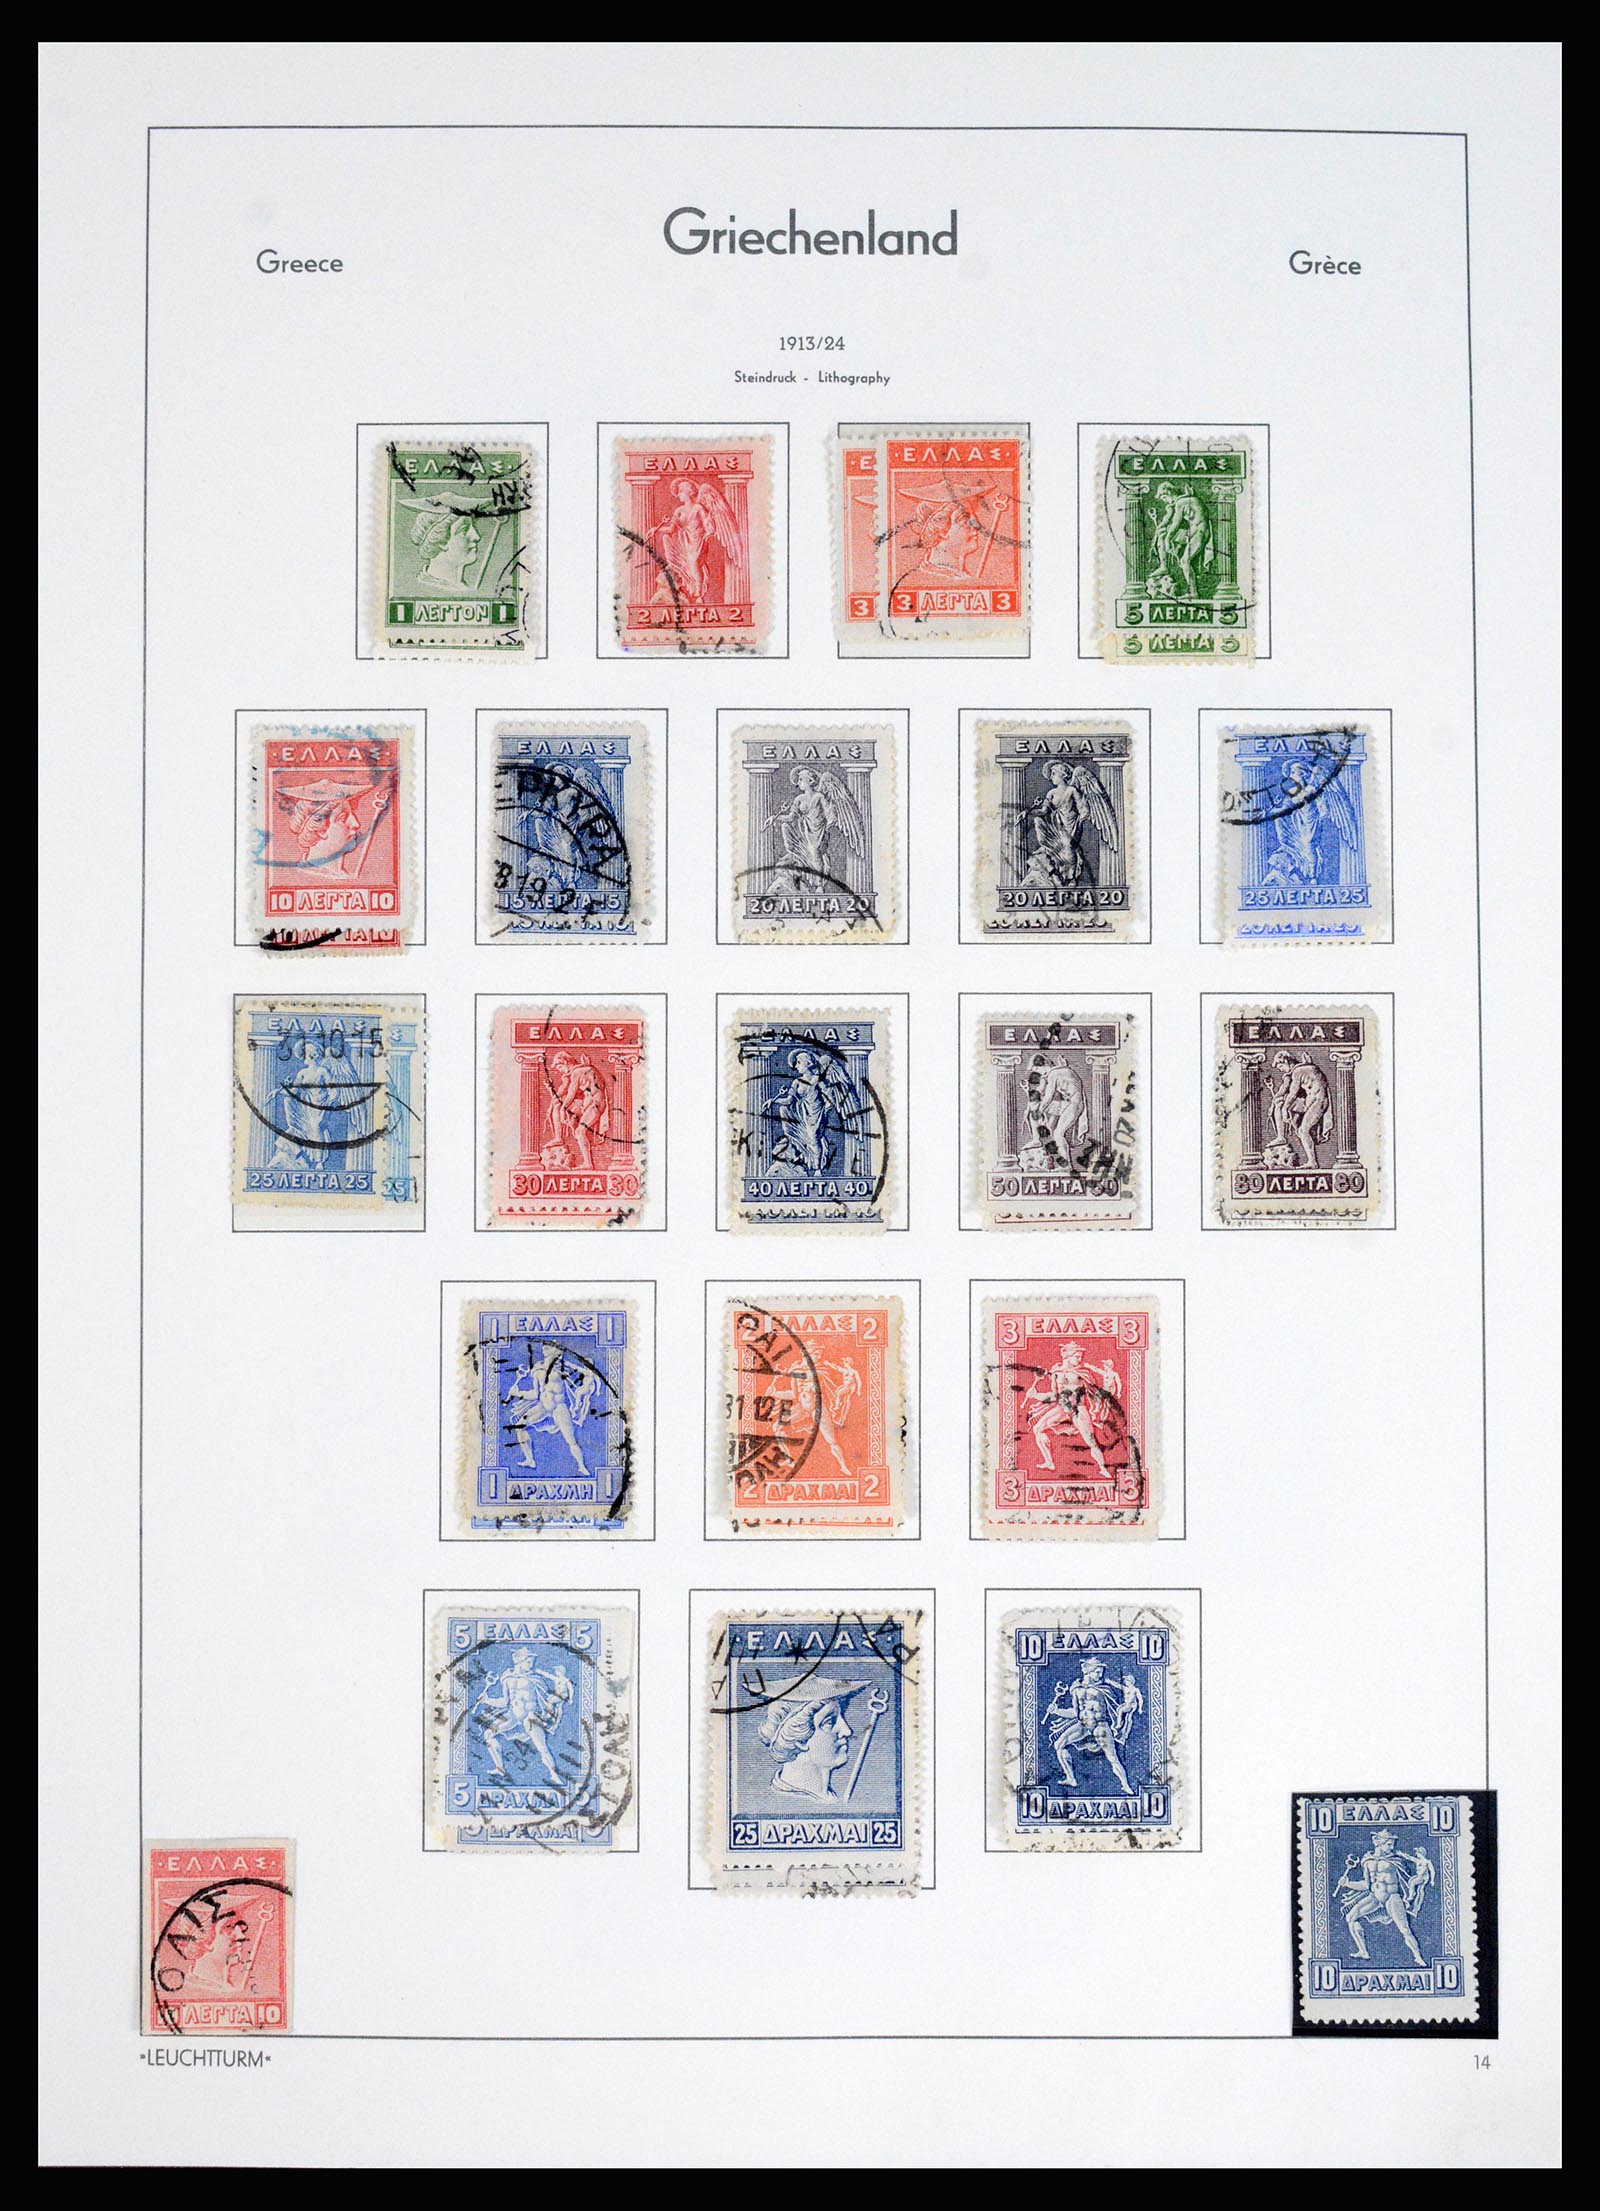 37127 020 - Stamp collection 37127 Greece 1861-1985.